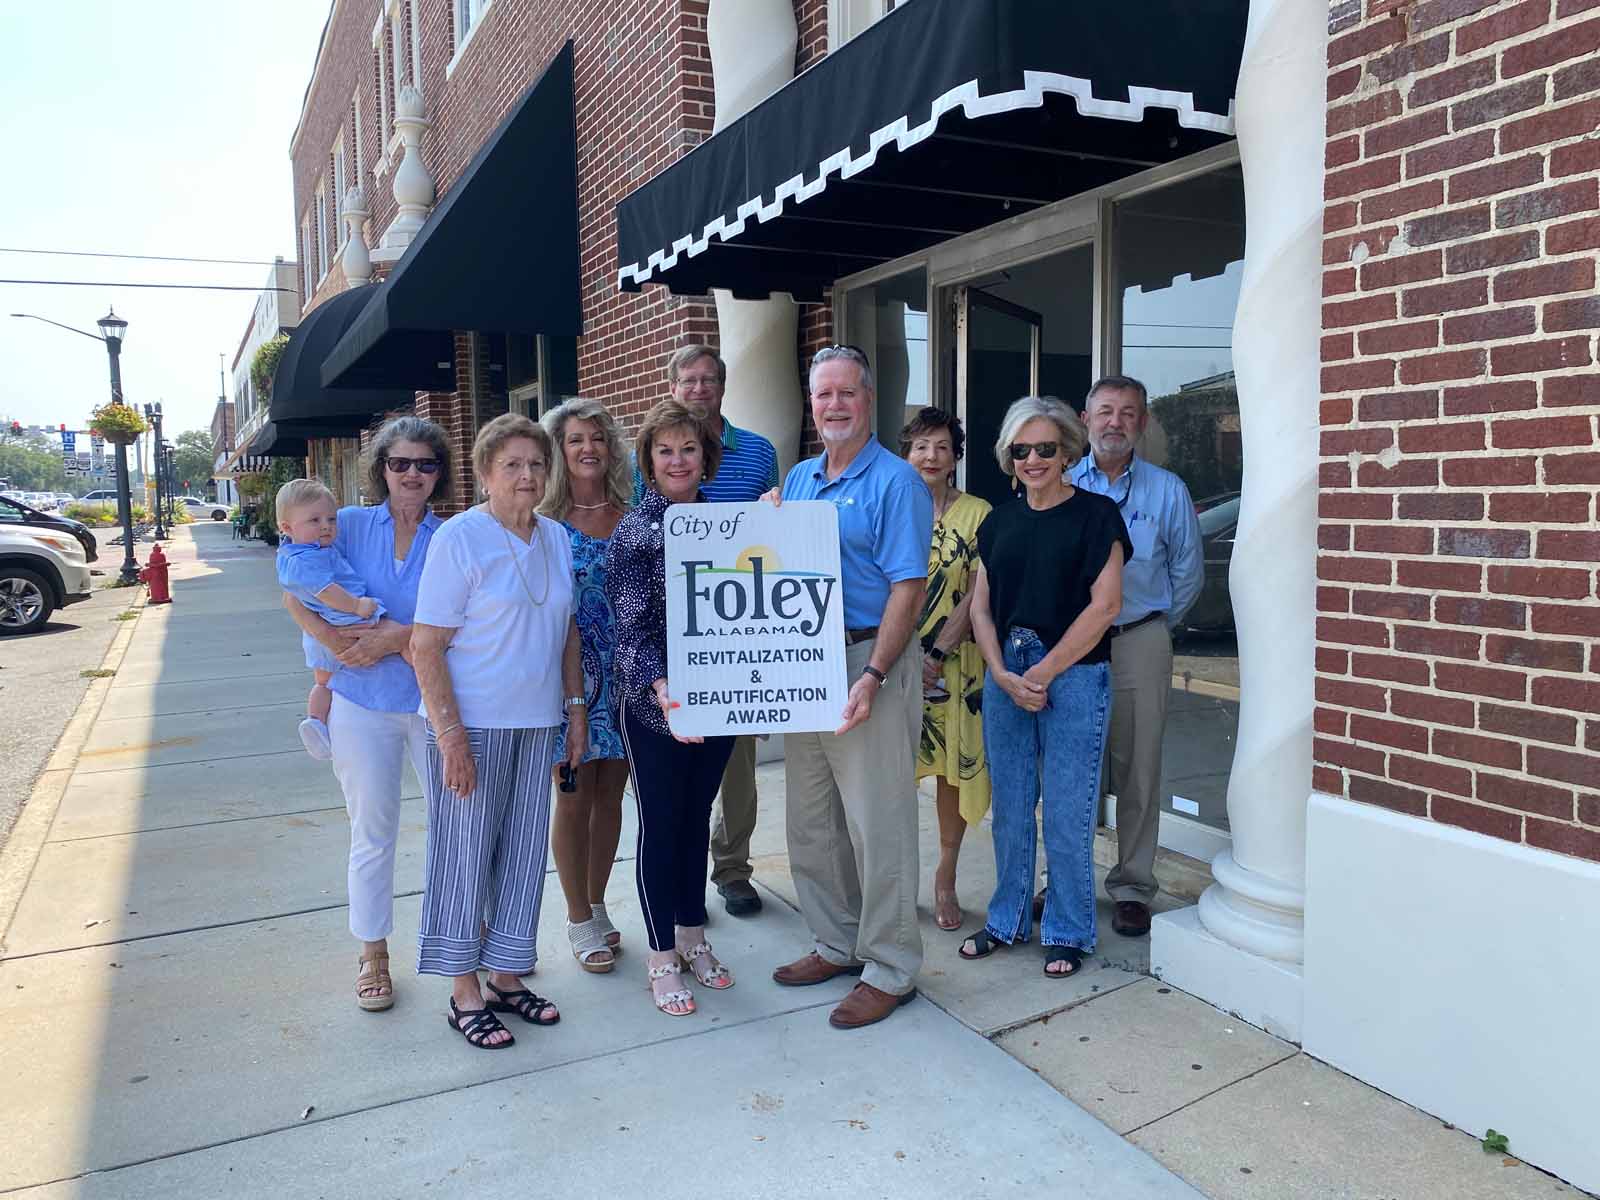 Foley Details Construction Projects, Beautification Awards Winners